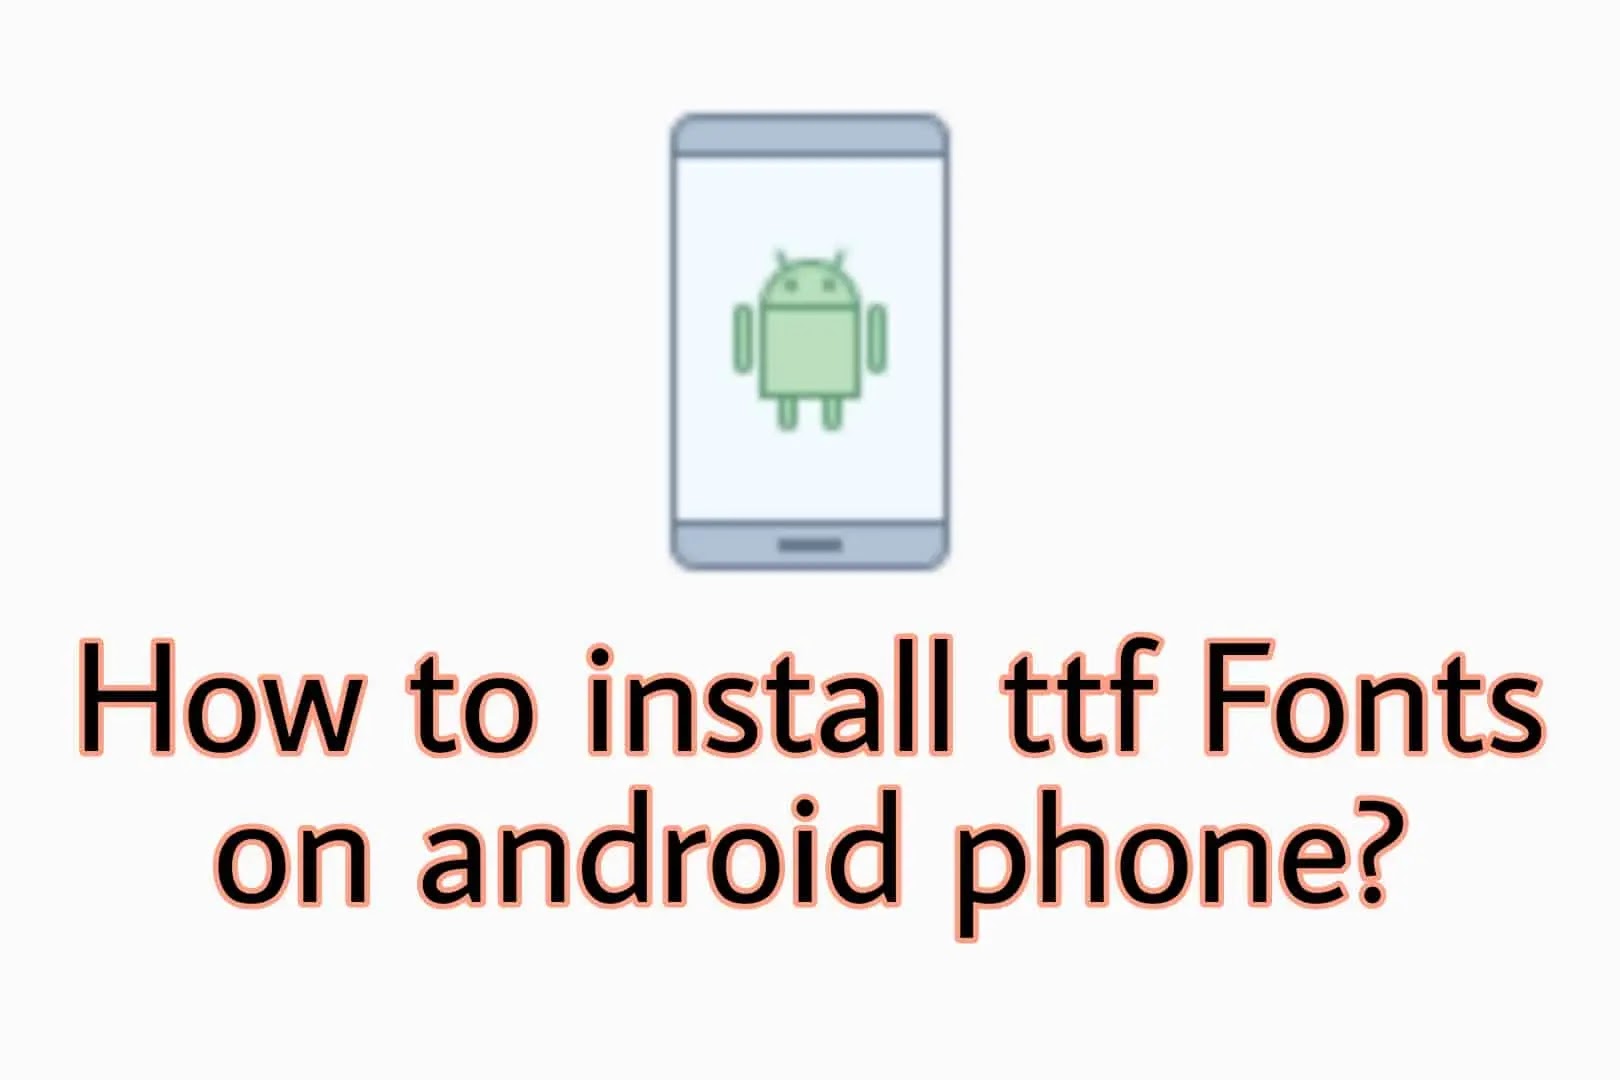 How to install TTF fonts on Samsung or any Android device without root?